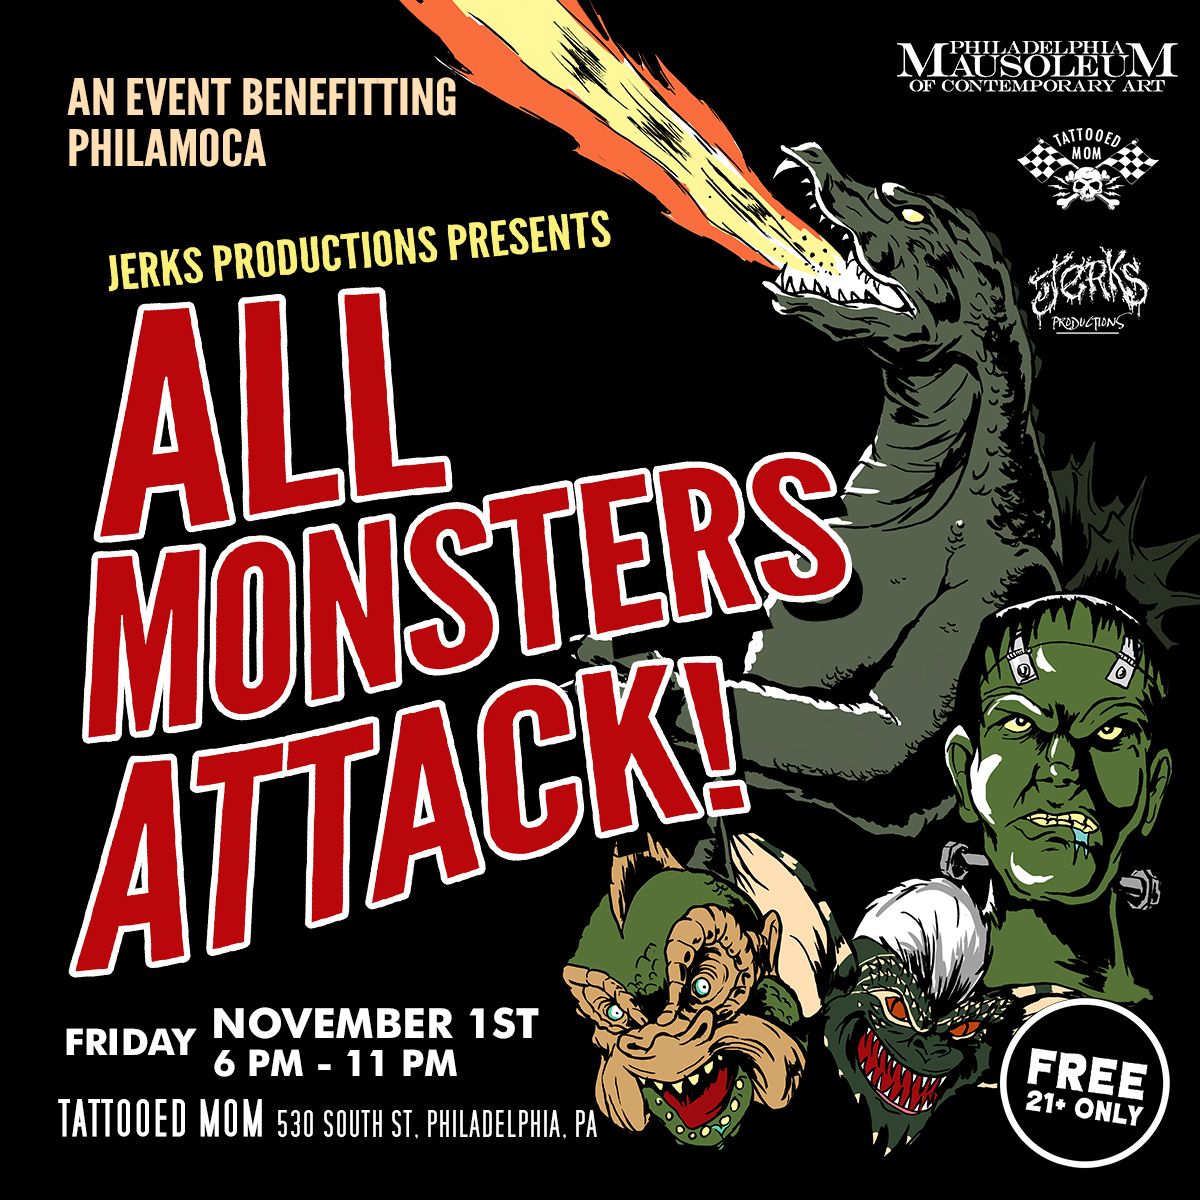 All Monsters Attack! small ad